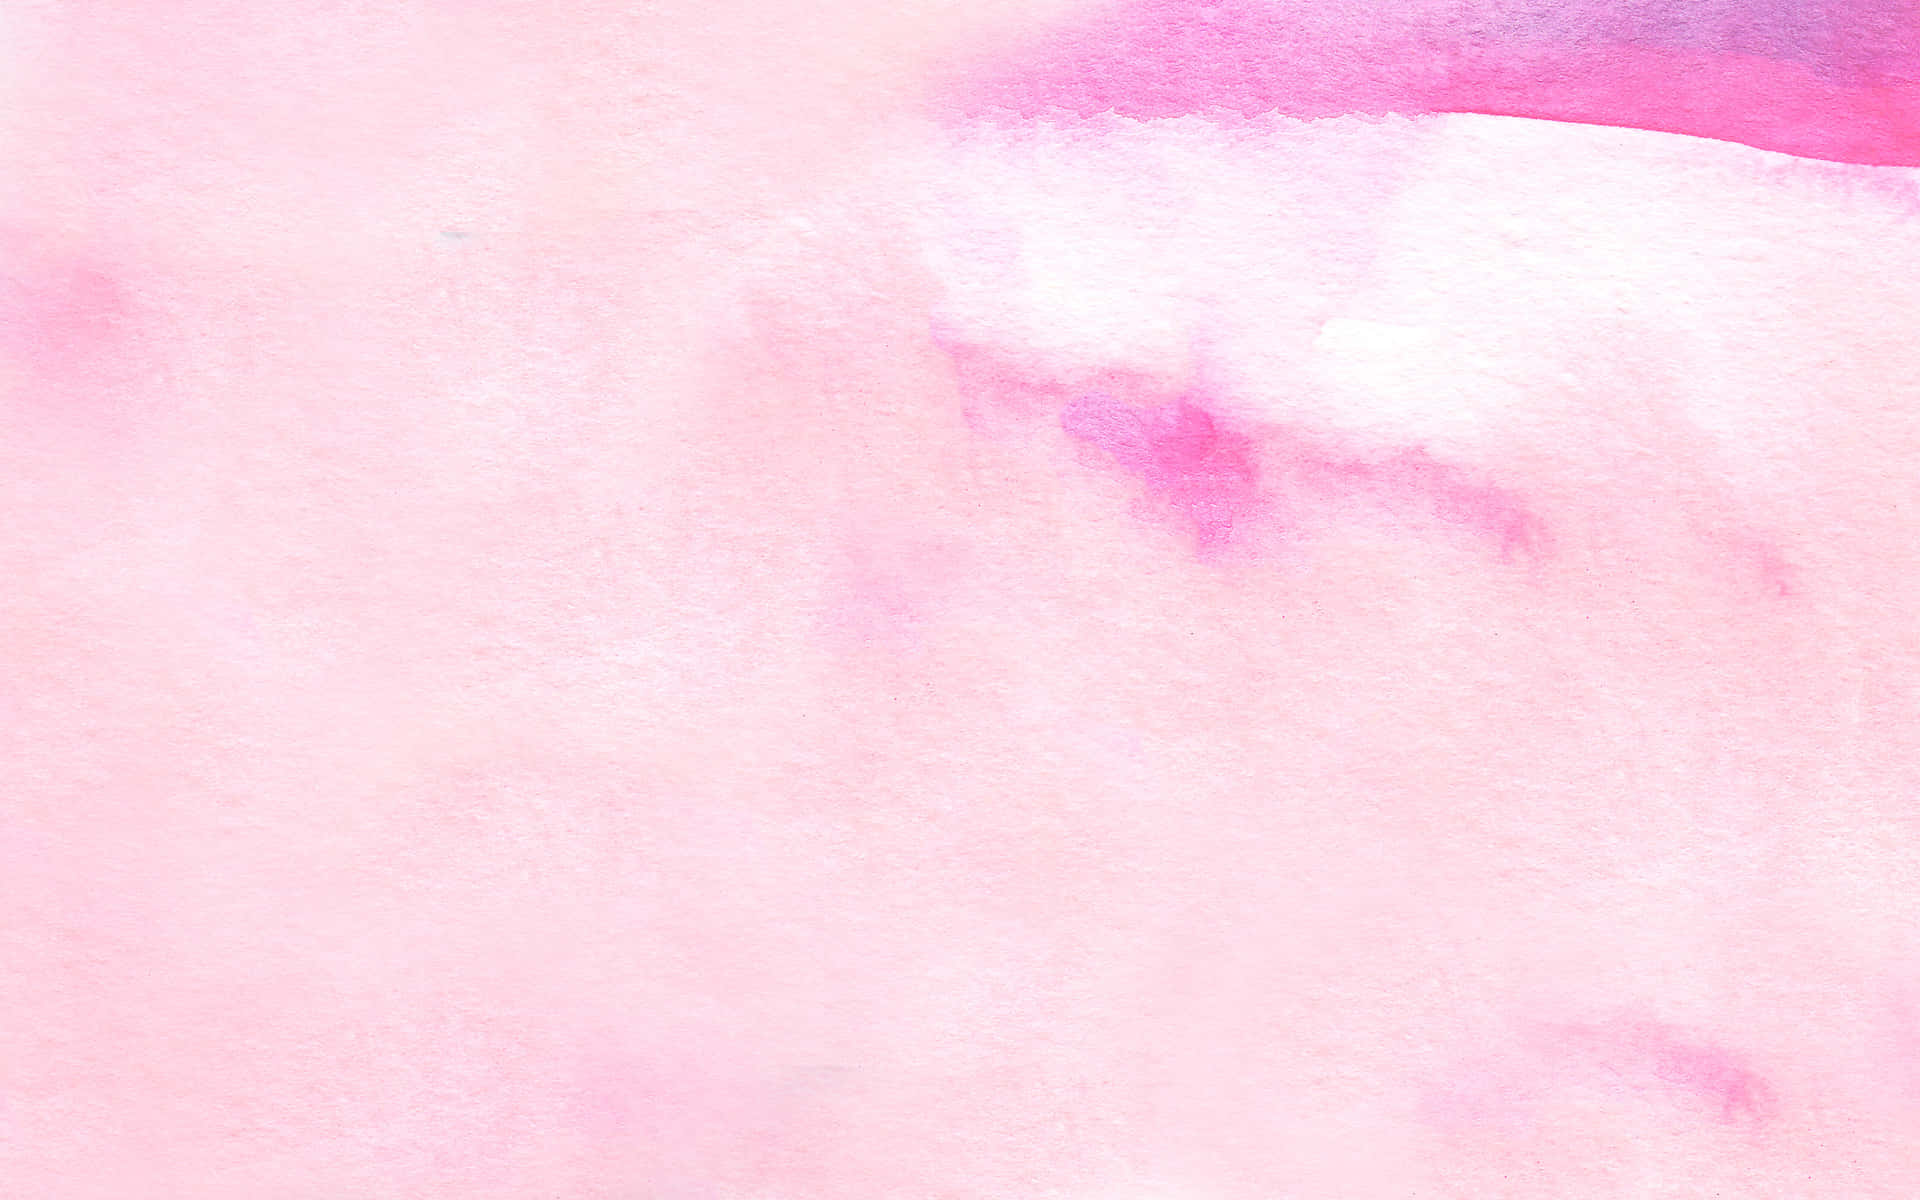 A Pink Watercolor Painting On A White Background Wallpaper